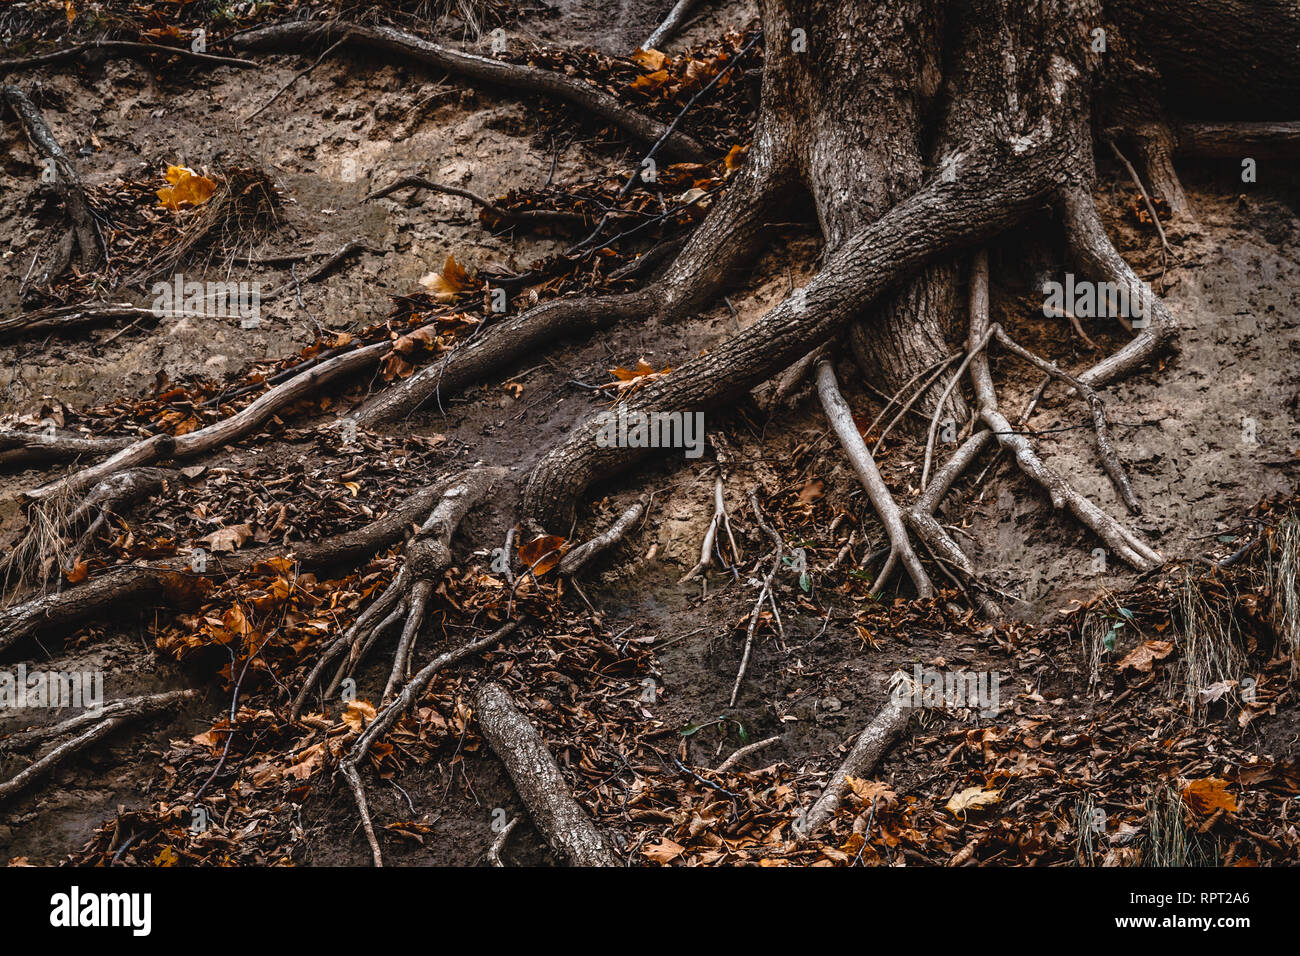 Big roots of a shredded tree crawling on the ground, autumn leaves. Landscape. Stock Photo